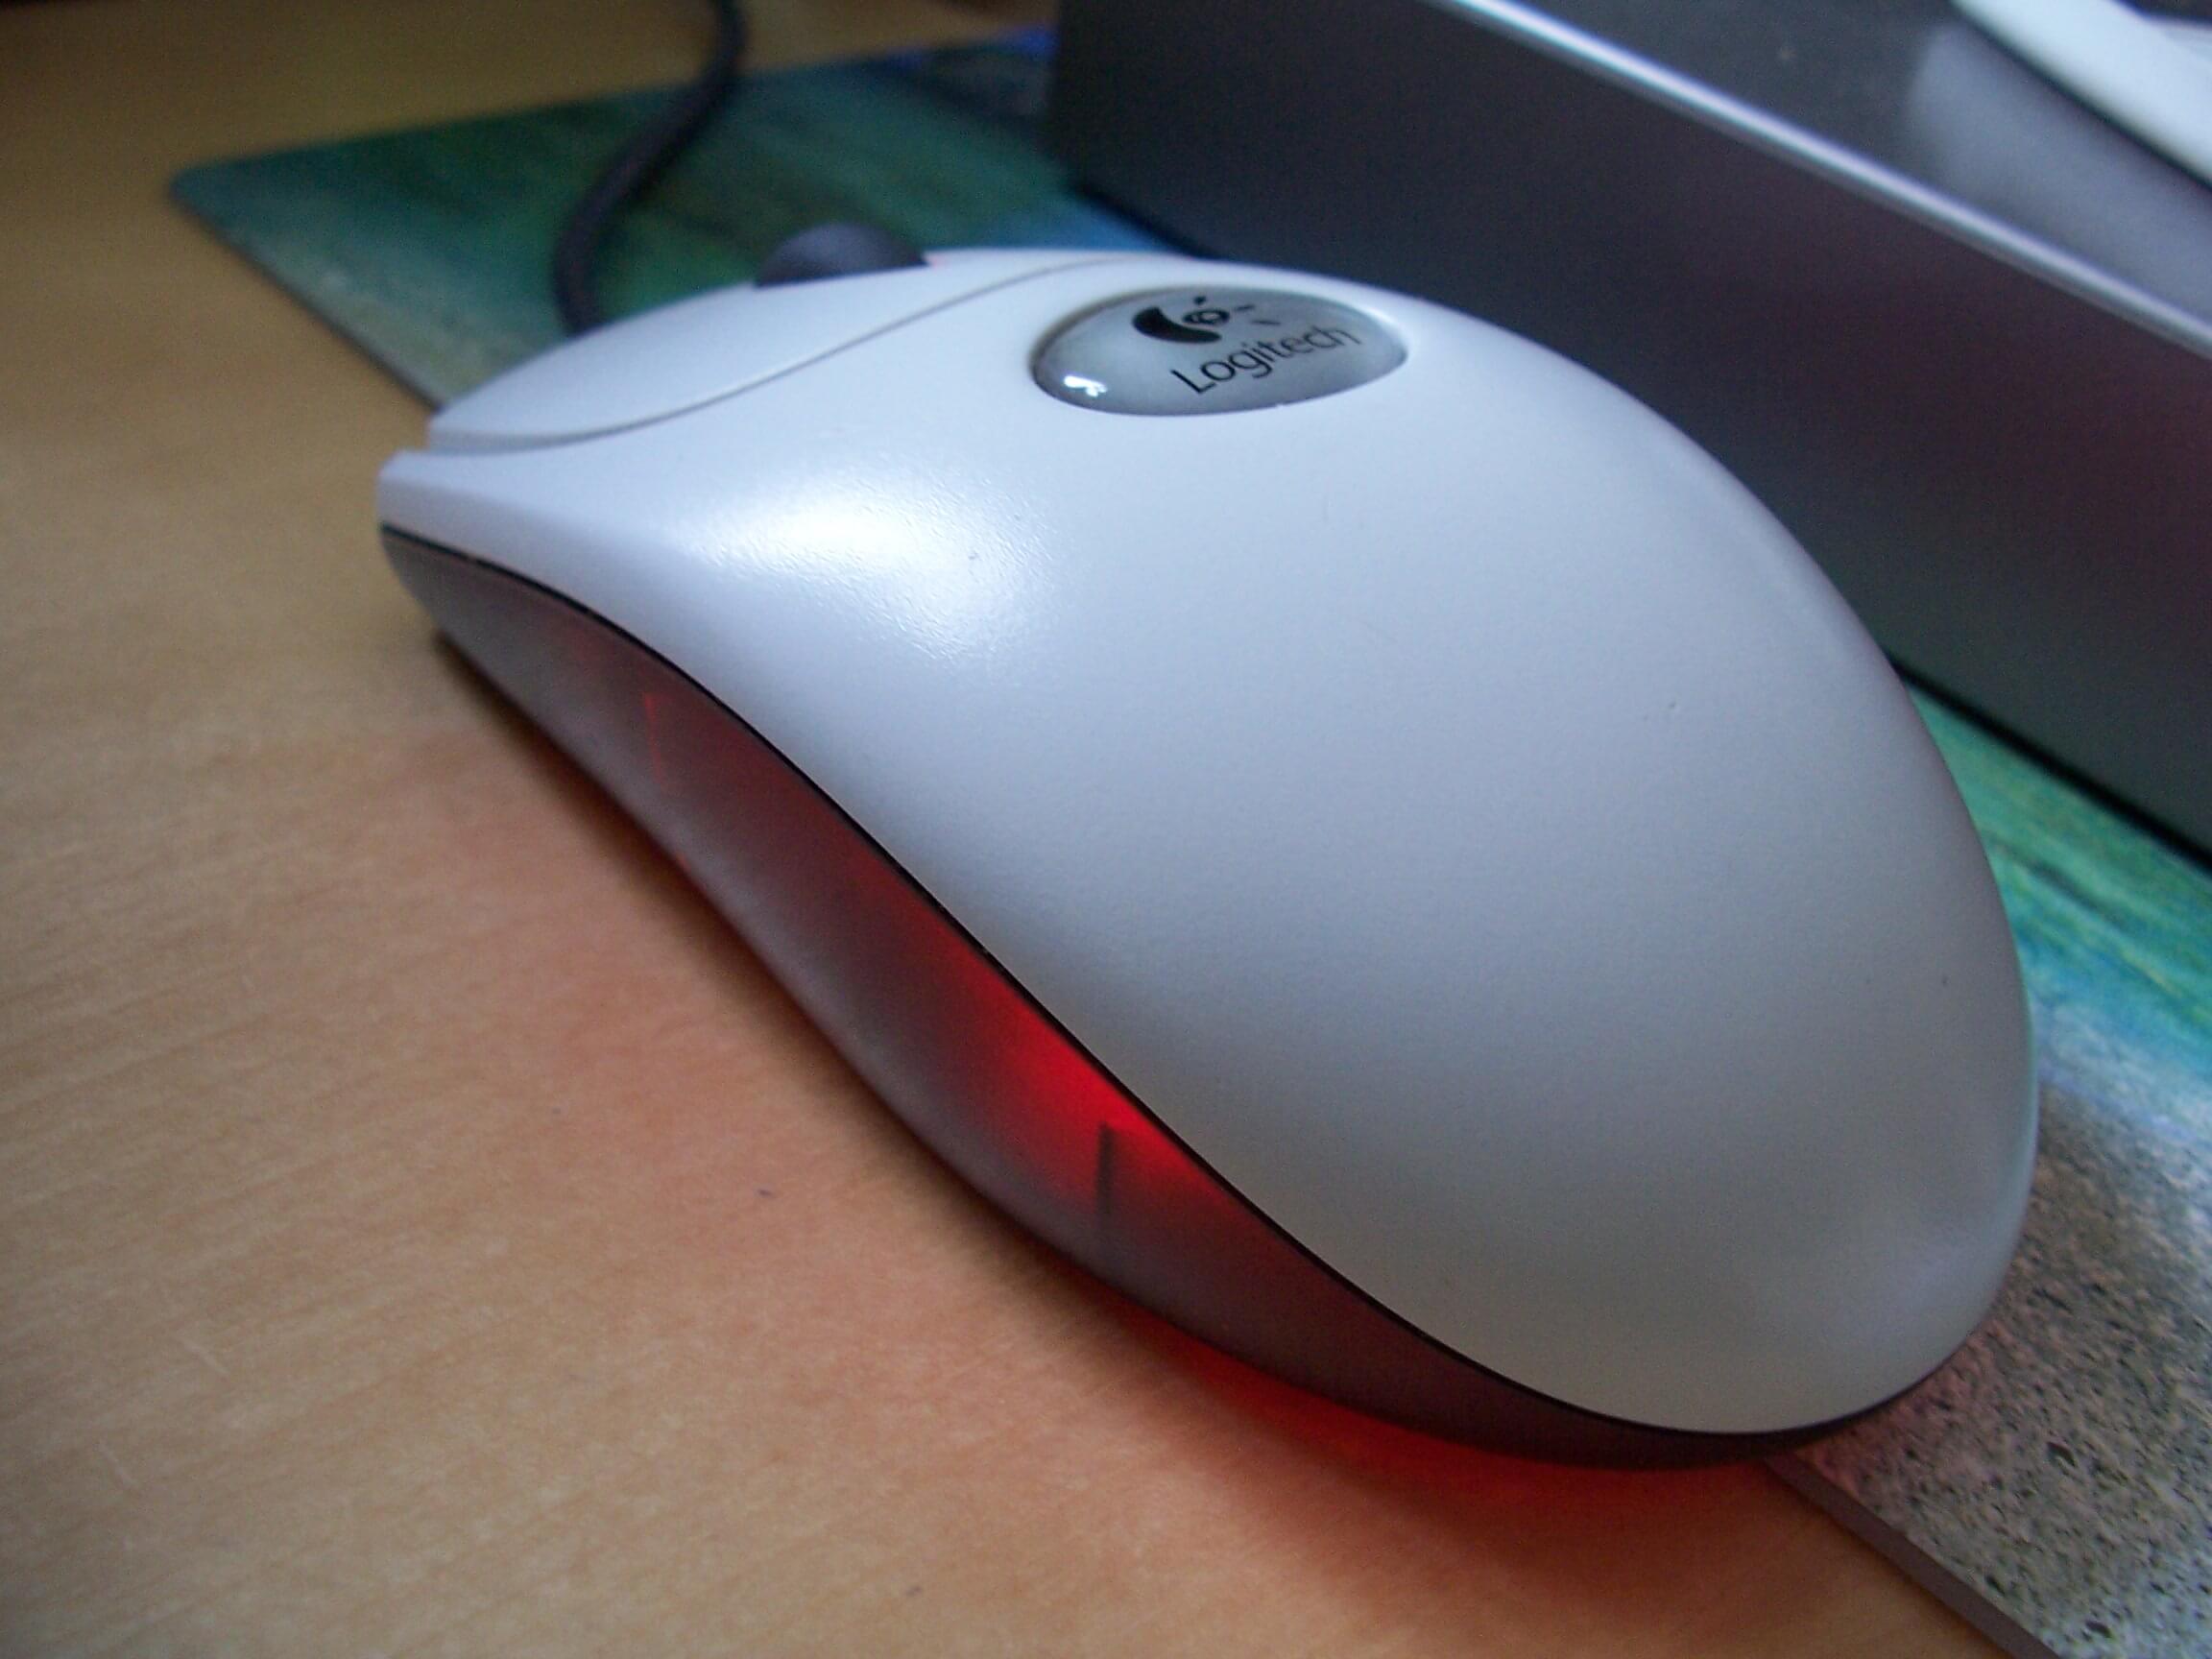 differences between optical mouse and laser mouse